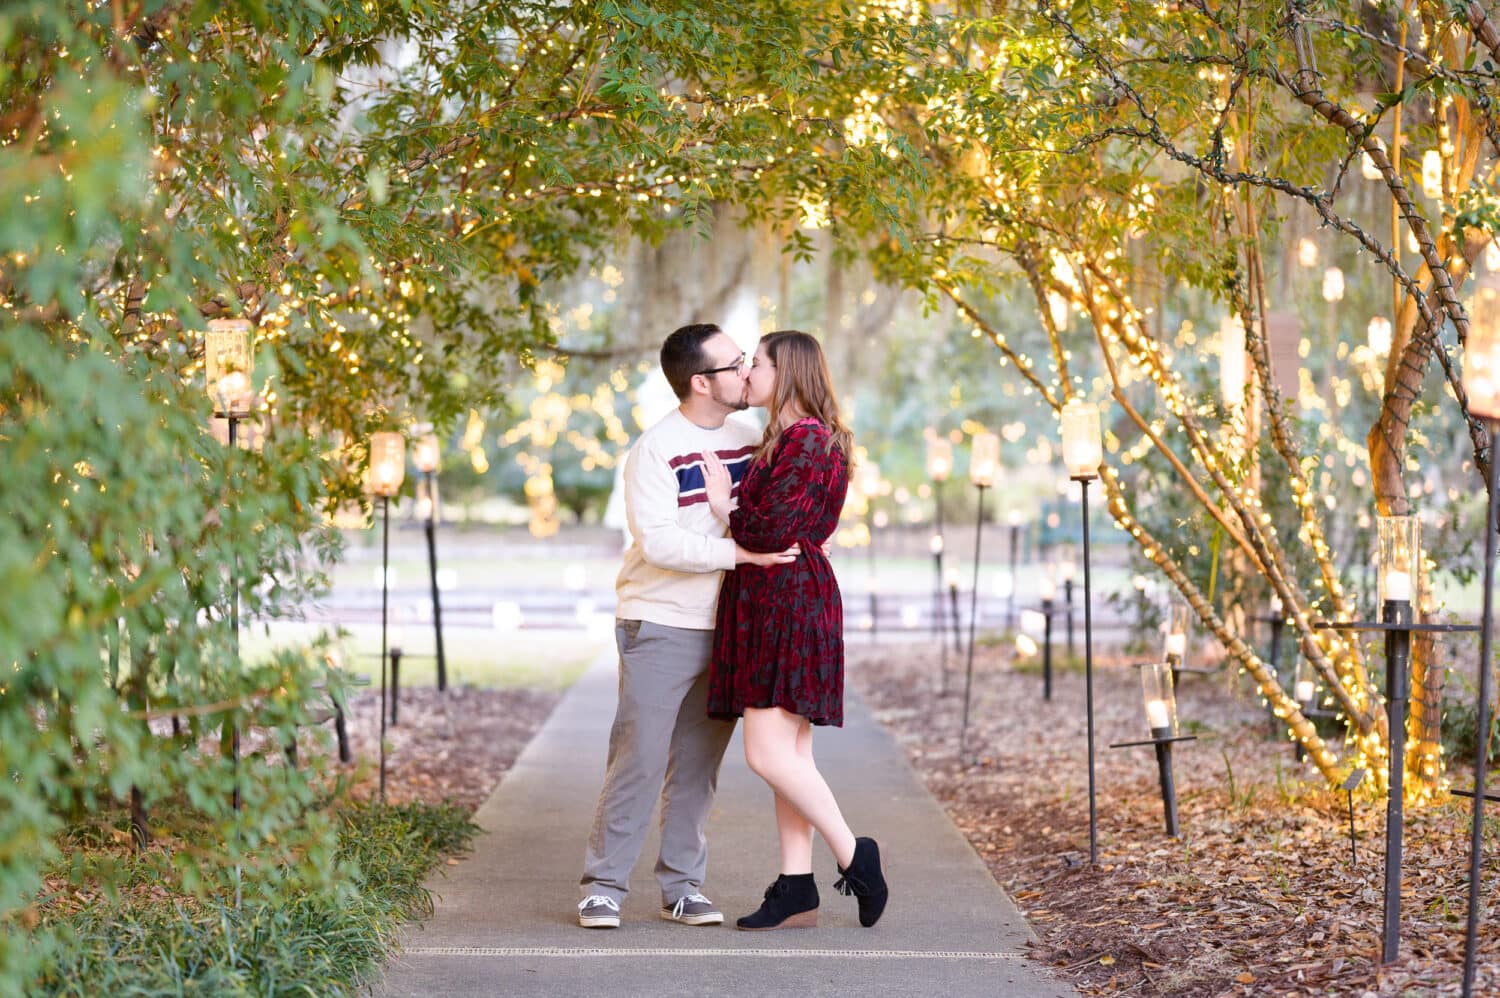 Kiss on the walkway surrounded by lights -